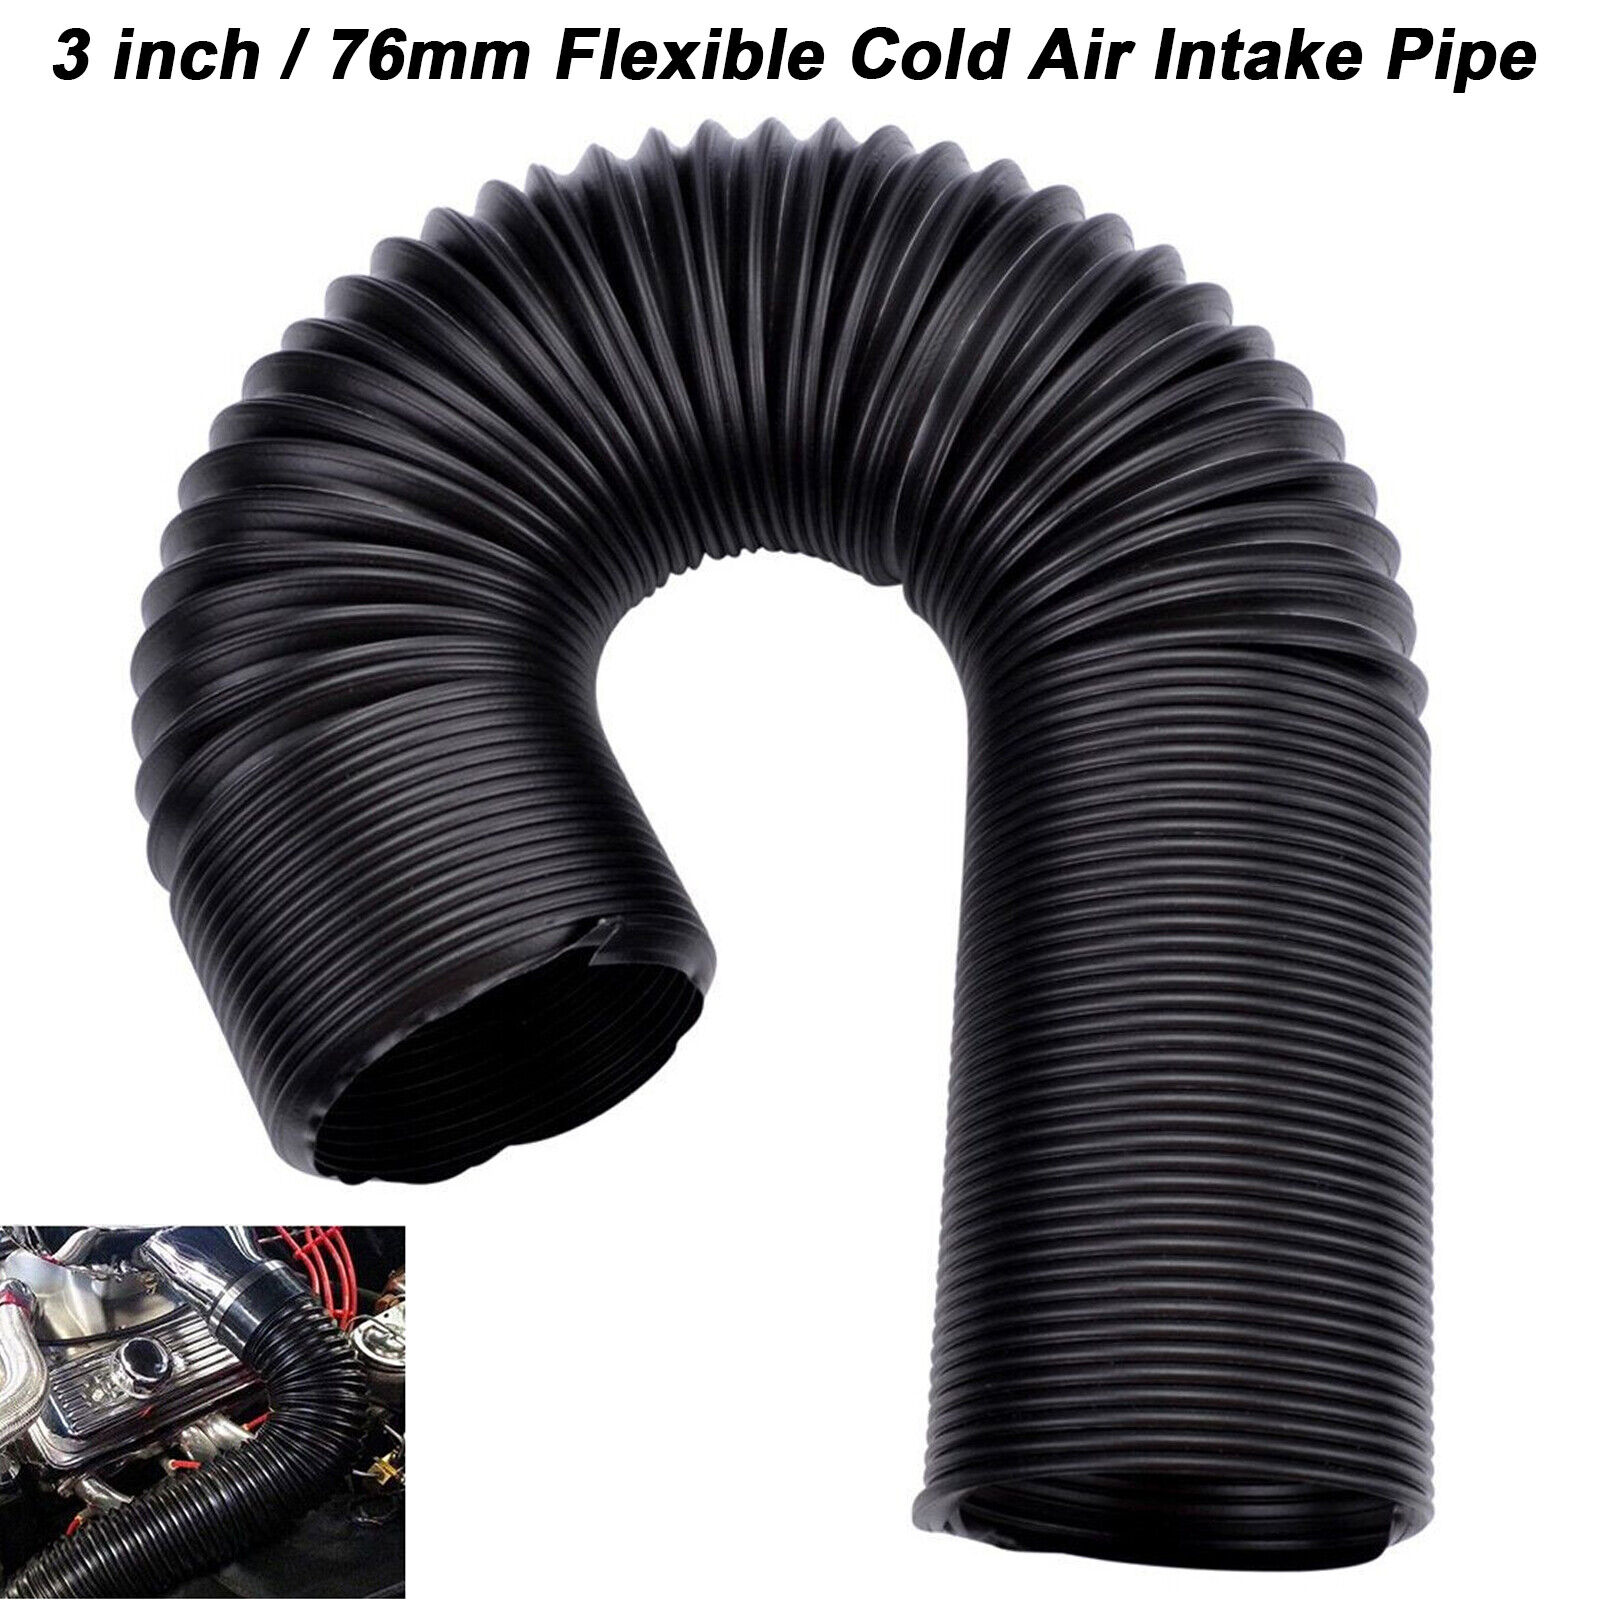 3 inch / 76mm Flexible Cold Air Intake Systems Duct Feed Hose Pipe Adjustable